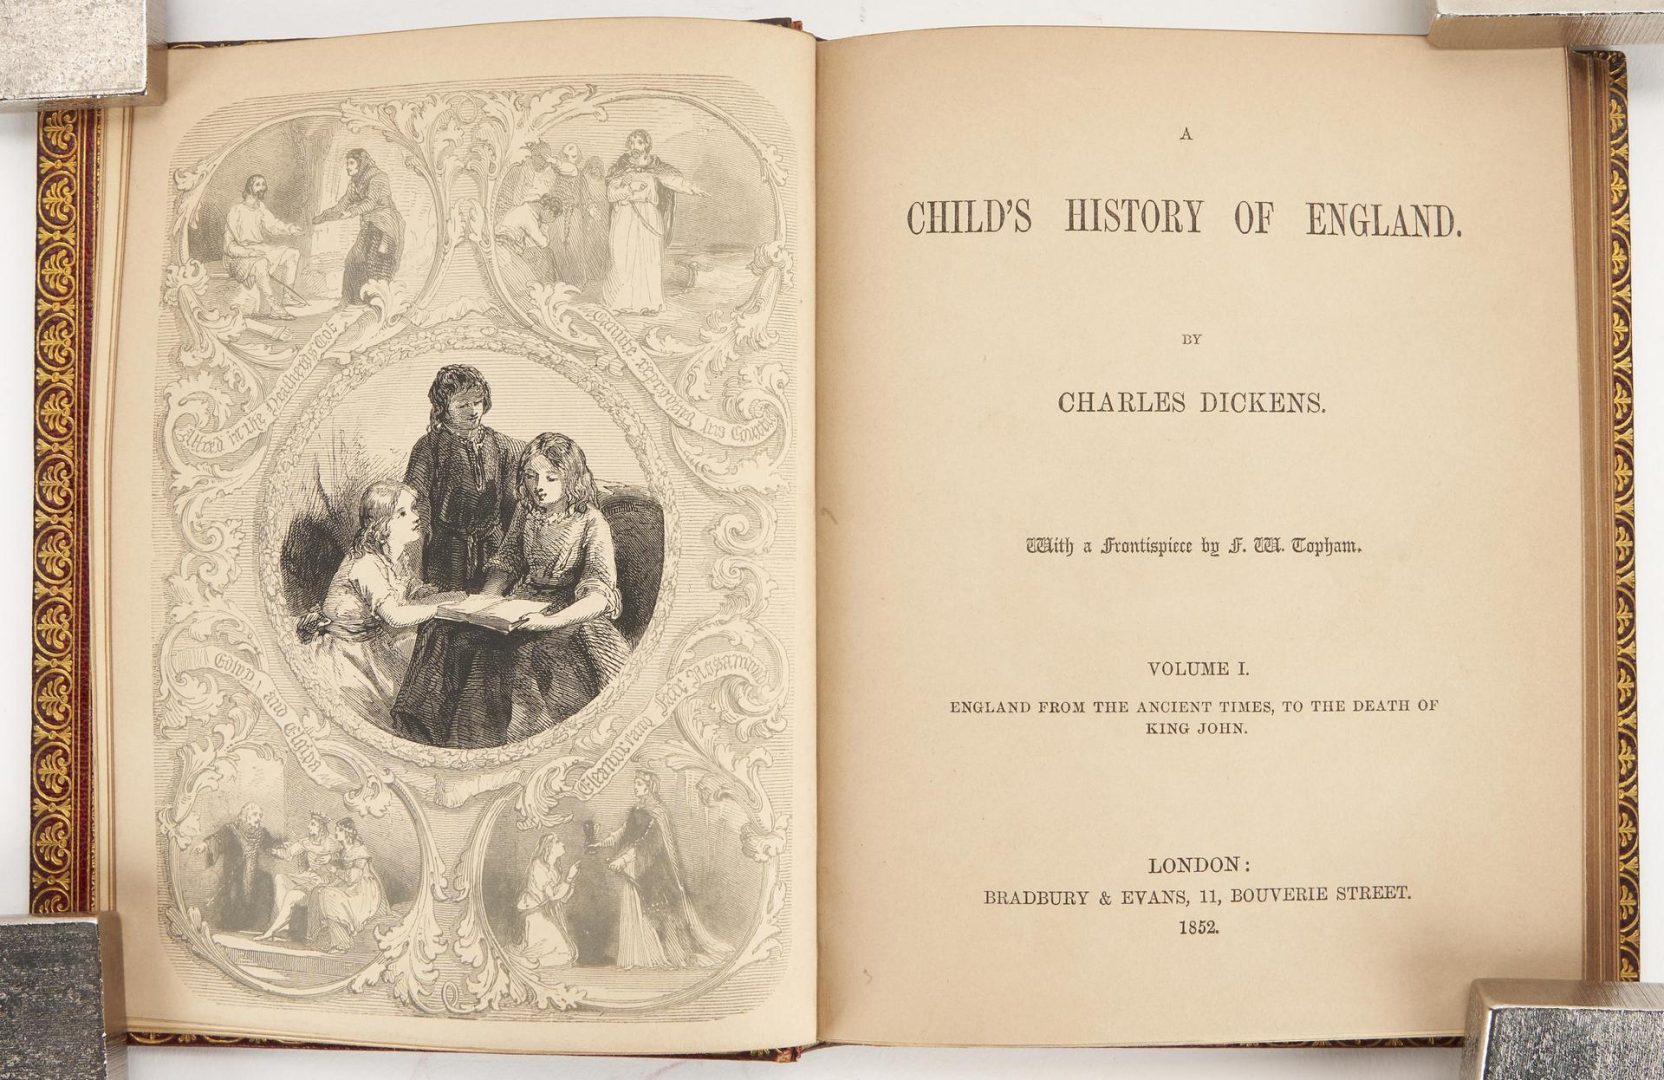 Lot 688: 13 Charles Dickens Books, Histories, Notes, Letters, incl. 1st Eds.